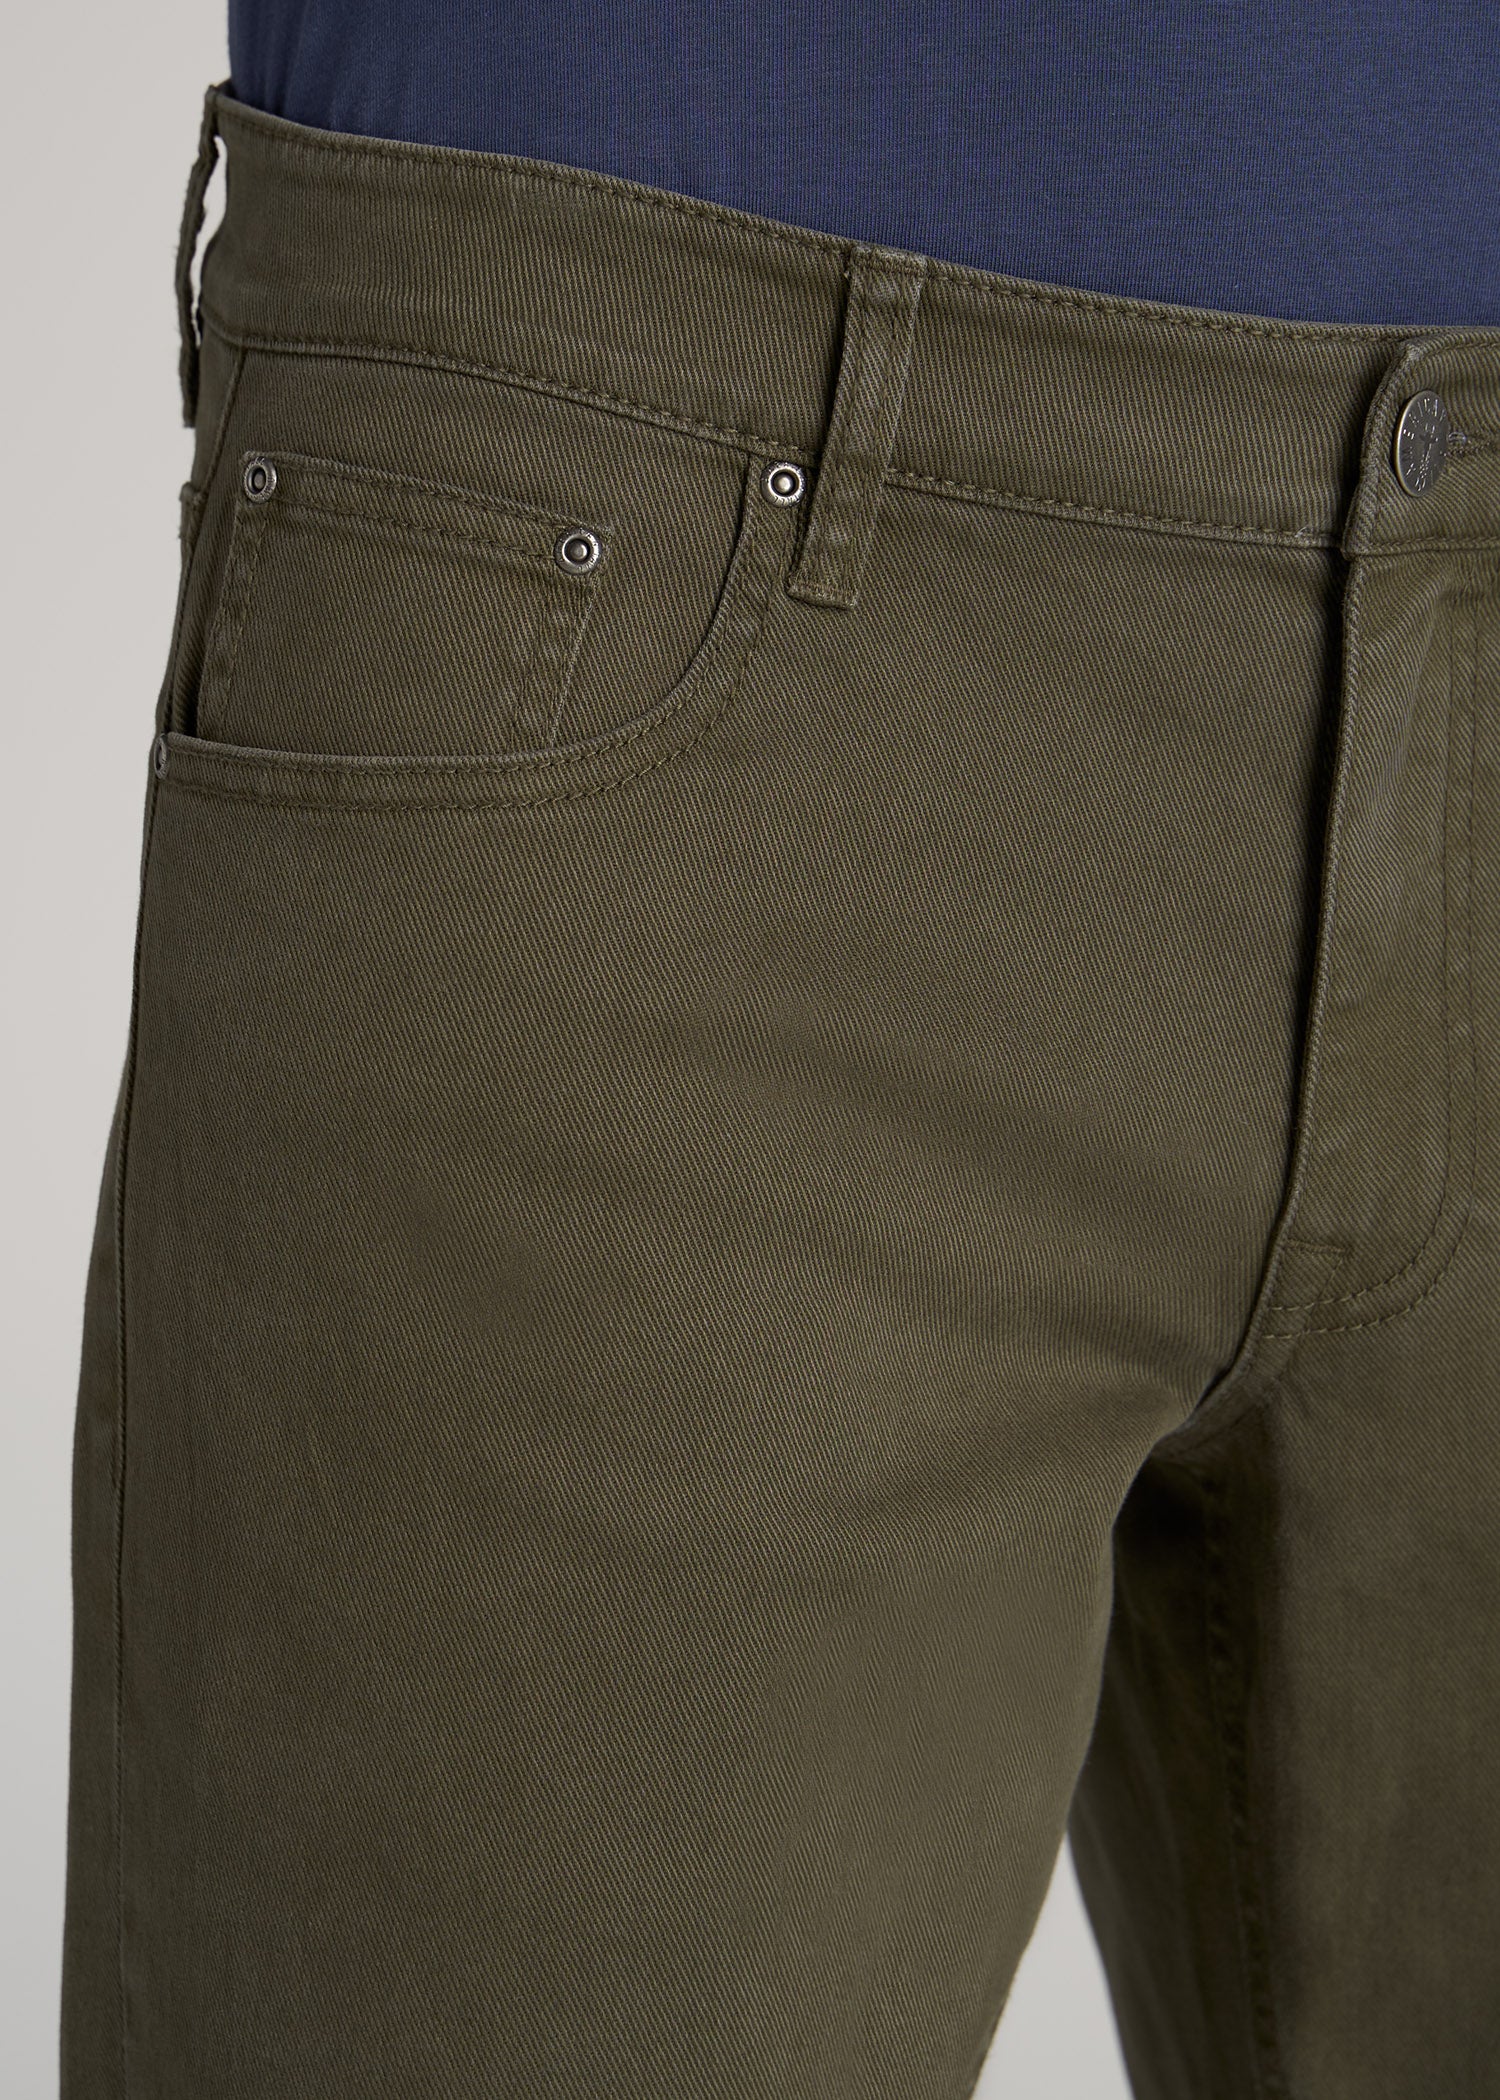       American-Tall-Men-Carman-Tapered-Fit-Jeans-Olive-Green-Wash-pocket